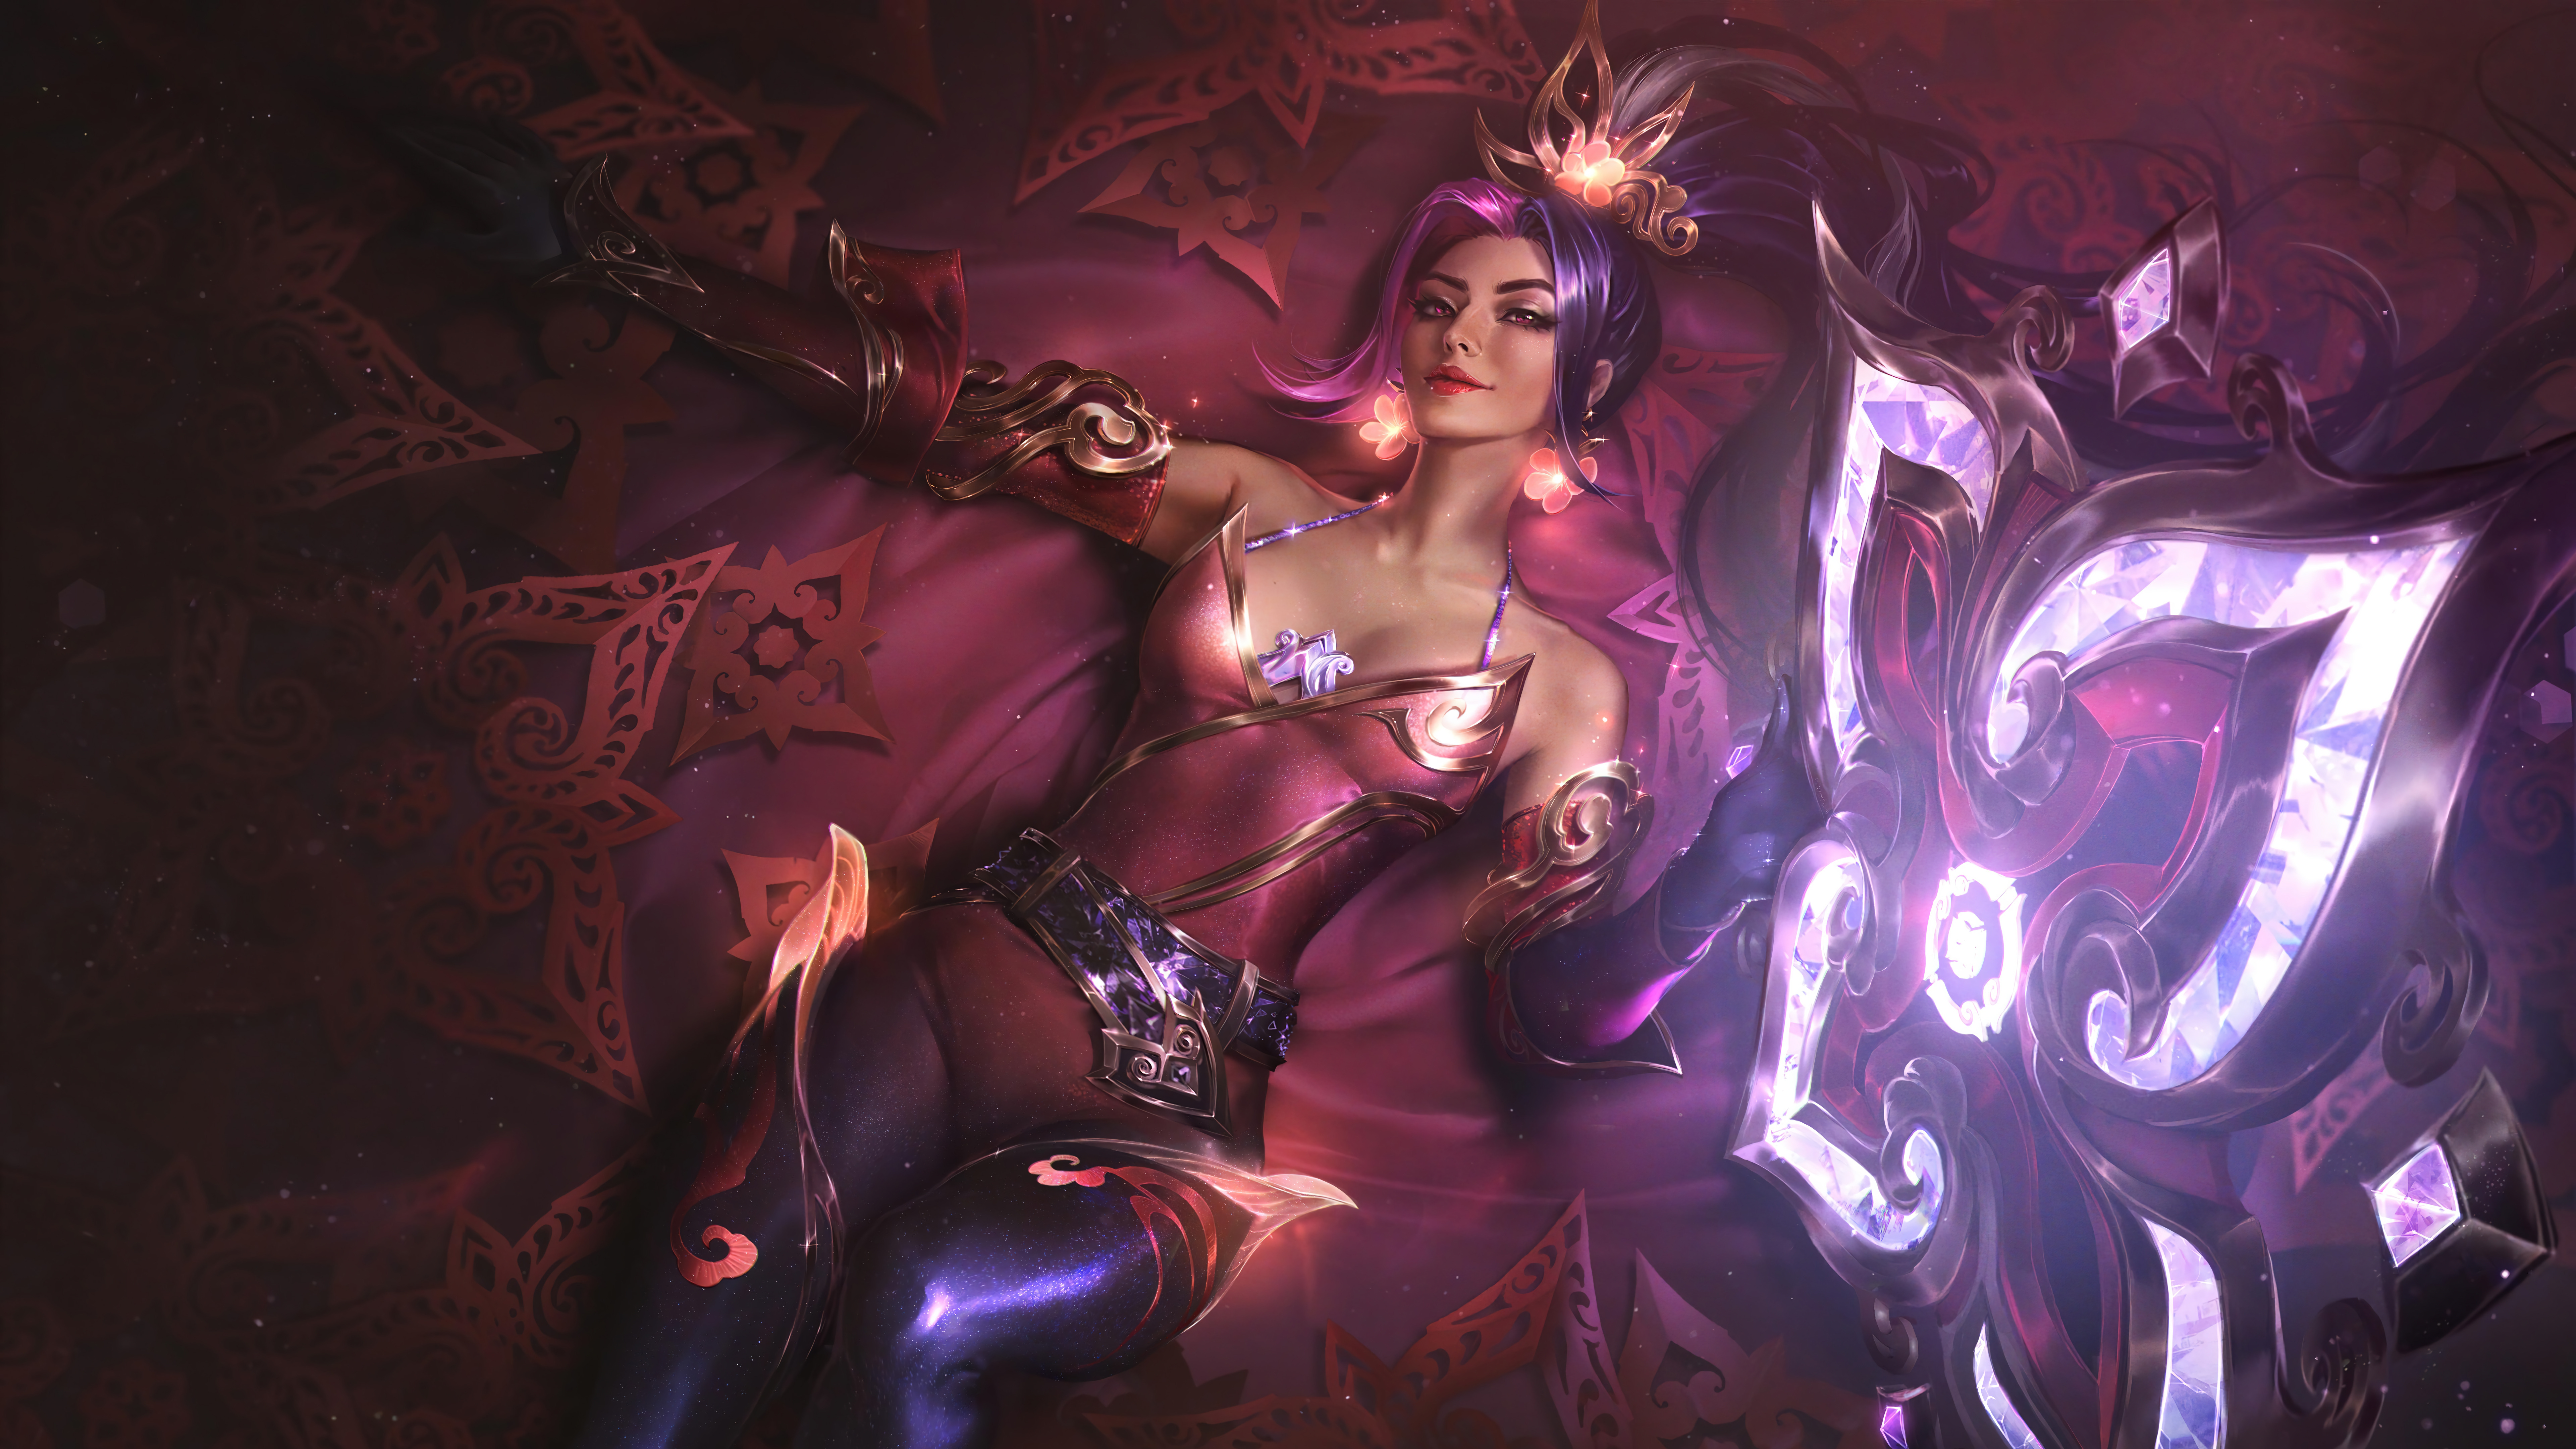 General 7680x4320 Mythmaker (League of Legends) League of Legends Prestige Edition (League of Legends) digital art Riot Games GZG 4K video game characters Sivir (League of Legends) Adcarry ADC video game art video games